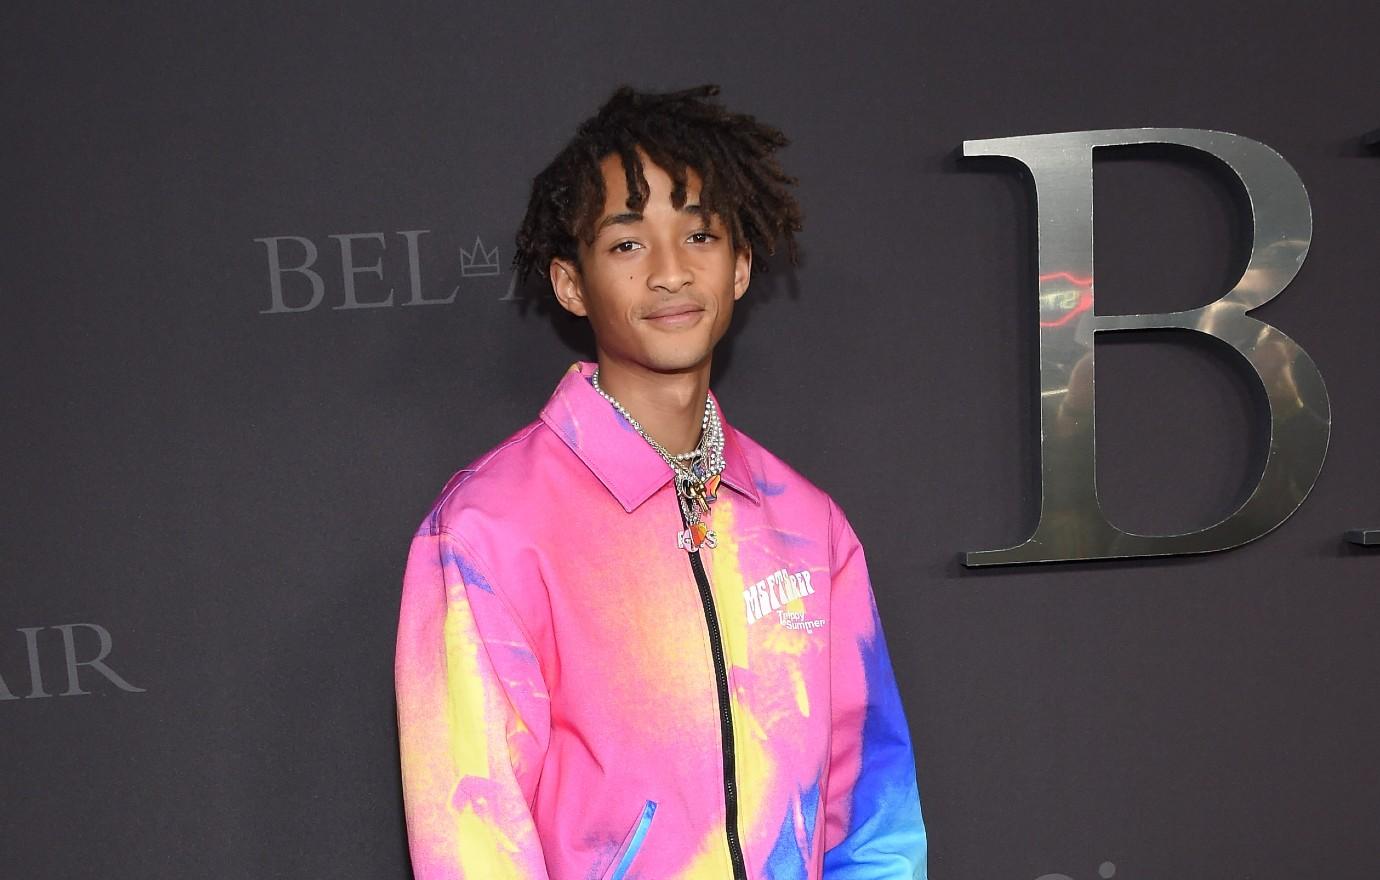 Jaden Smith Shapes Up in a Graphic Suit From His Own Brand for British Vogue  Fashion Party